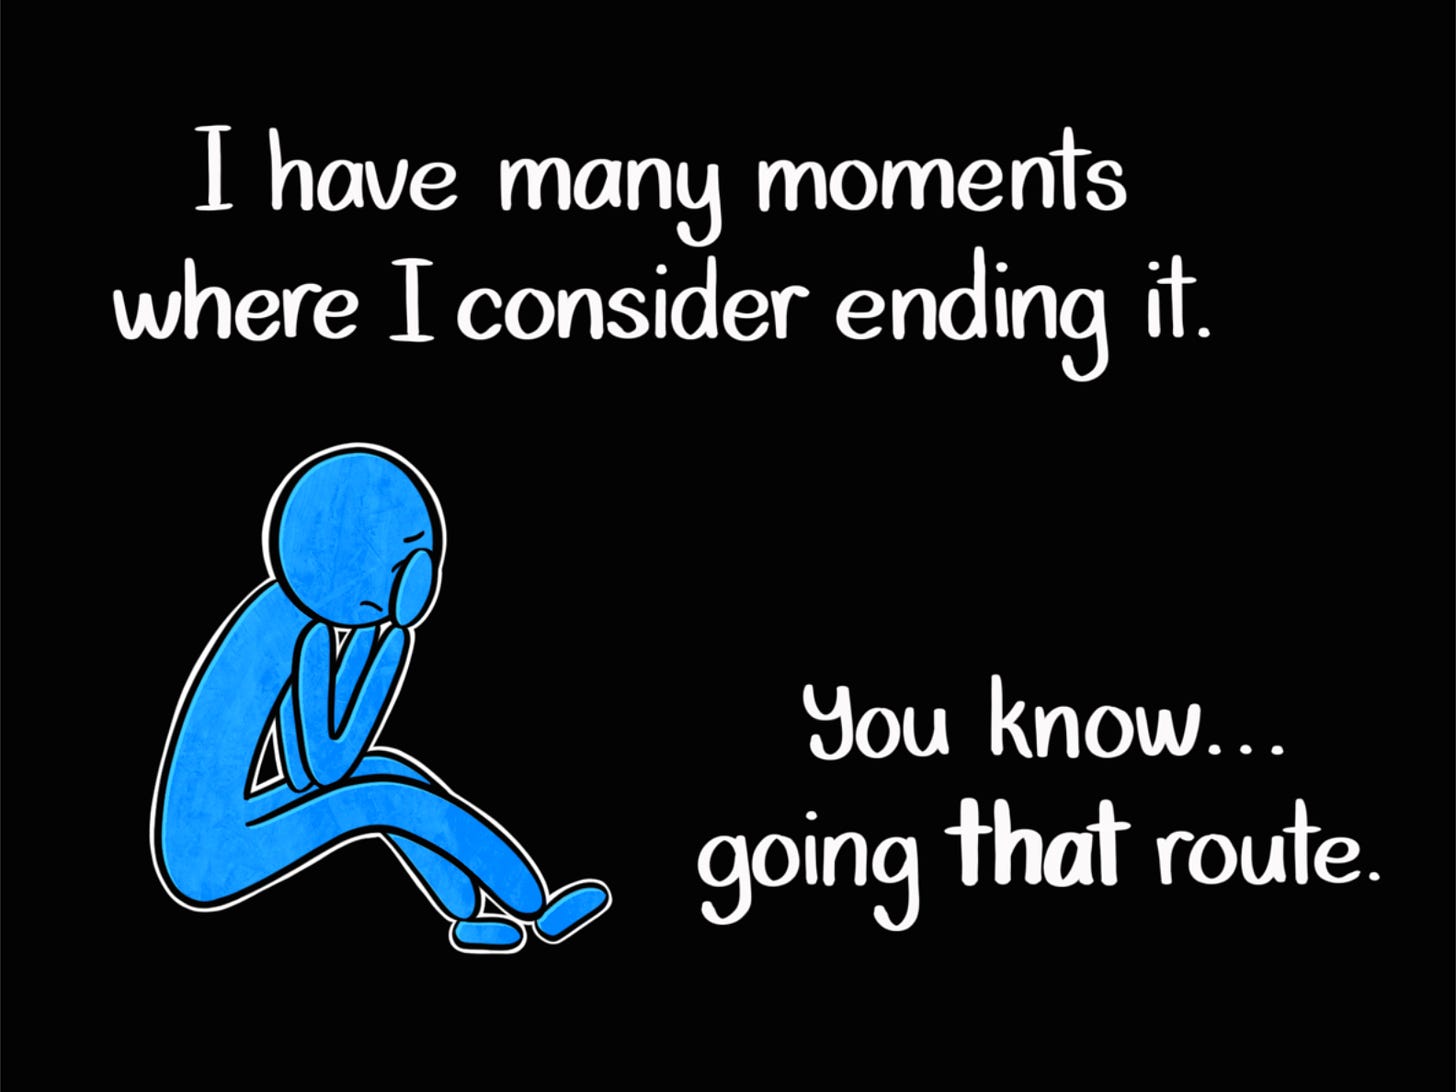 Caption: I have many moments where I consider ending it. You know... going THAT route. Image: The Blue Person sitting hunched over, head in their hands, against a black background. 